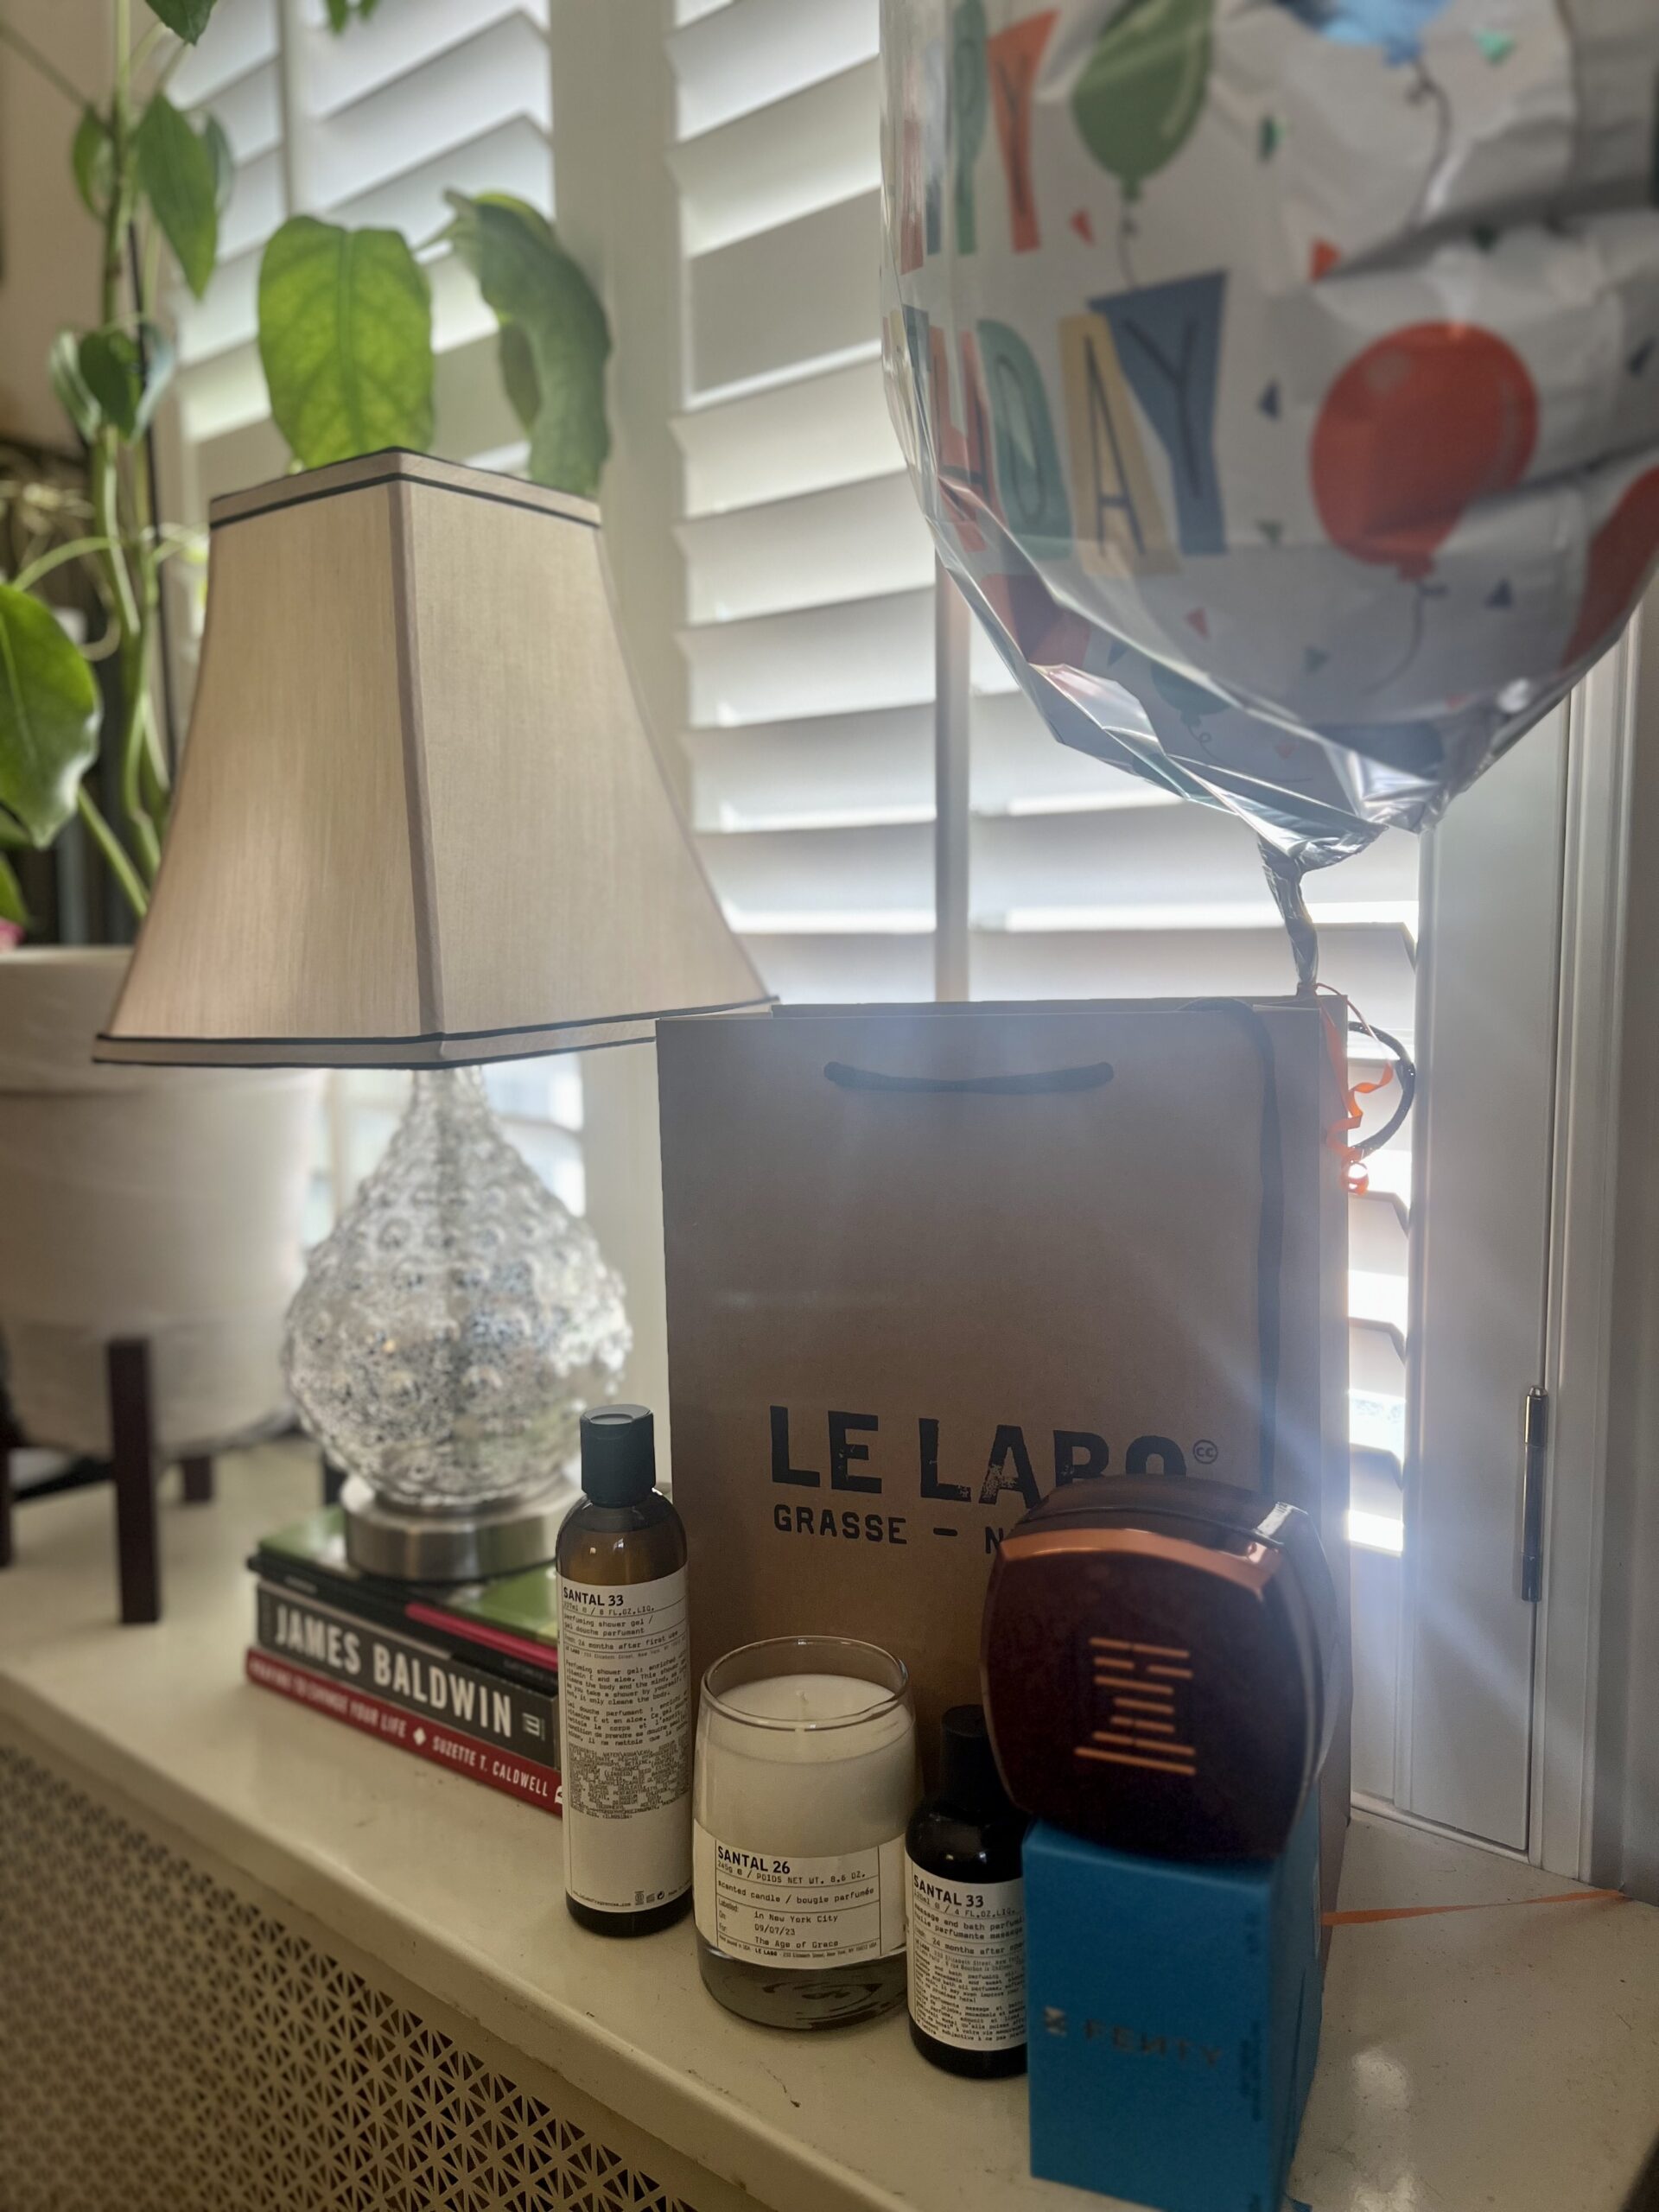 Birthday goodies of my fave Le Labo scents and Fenty skin product.